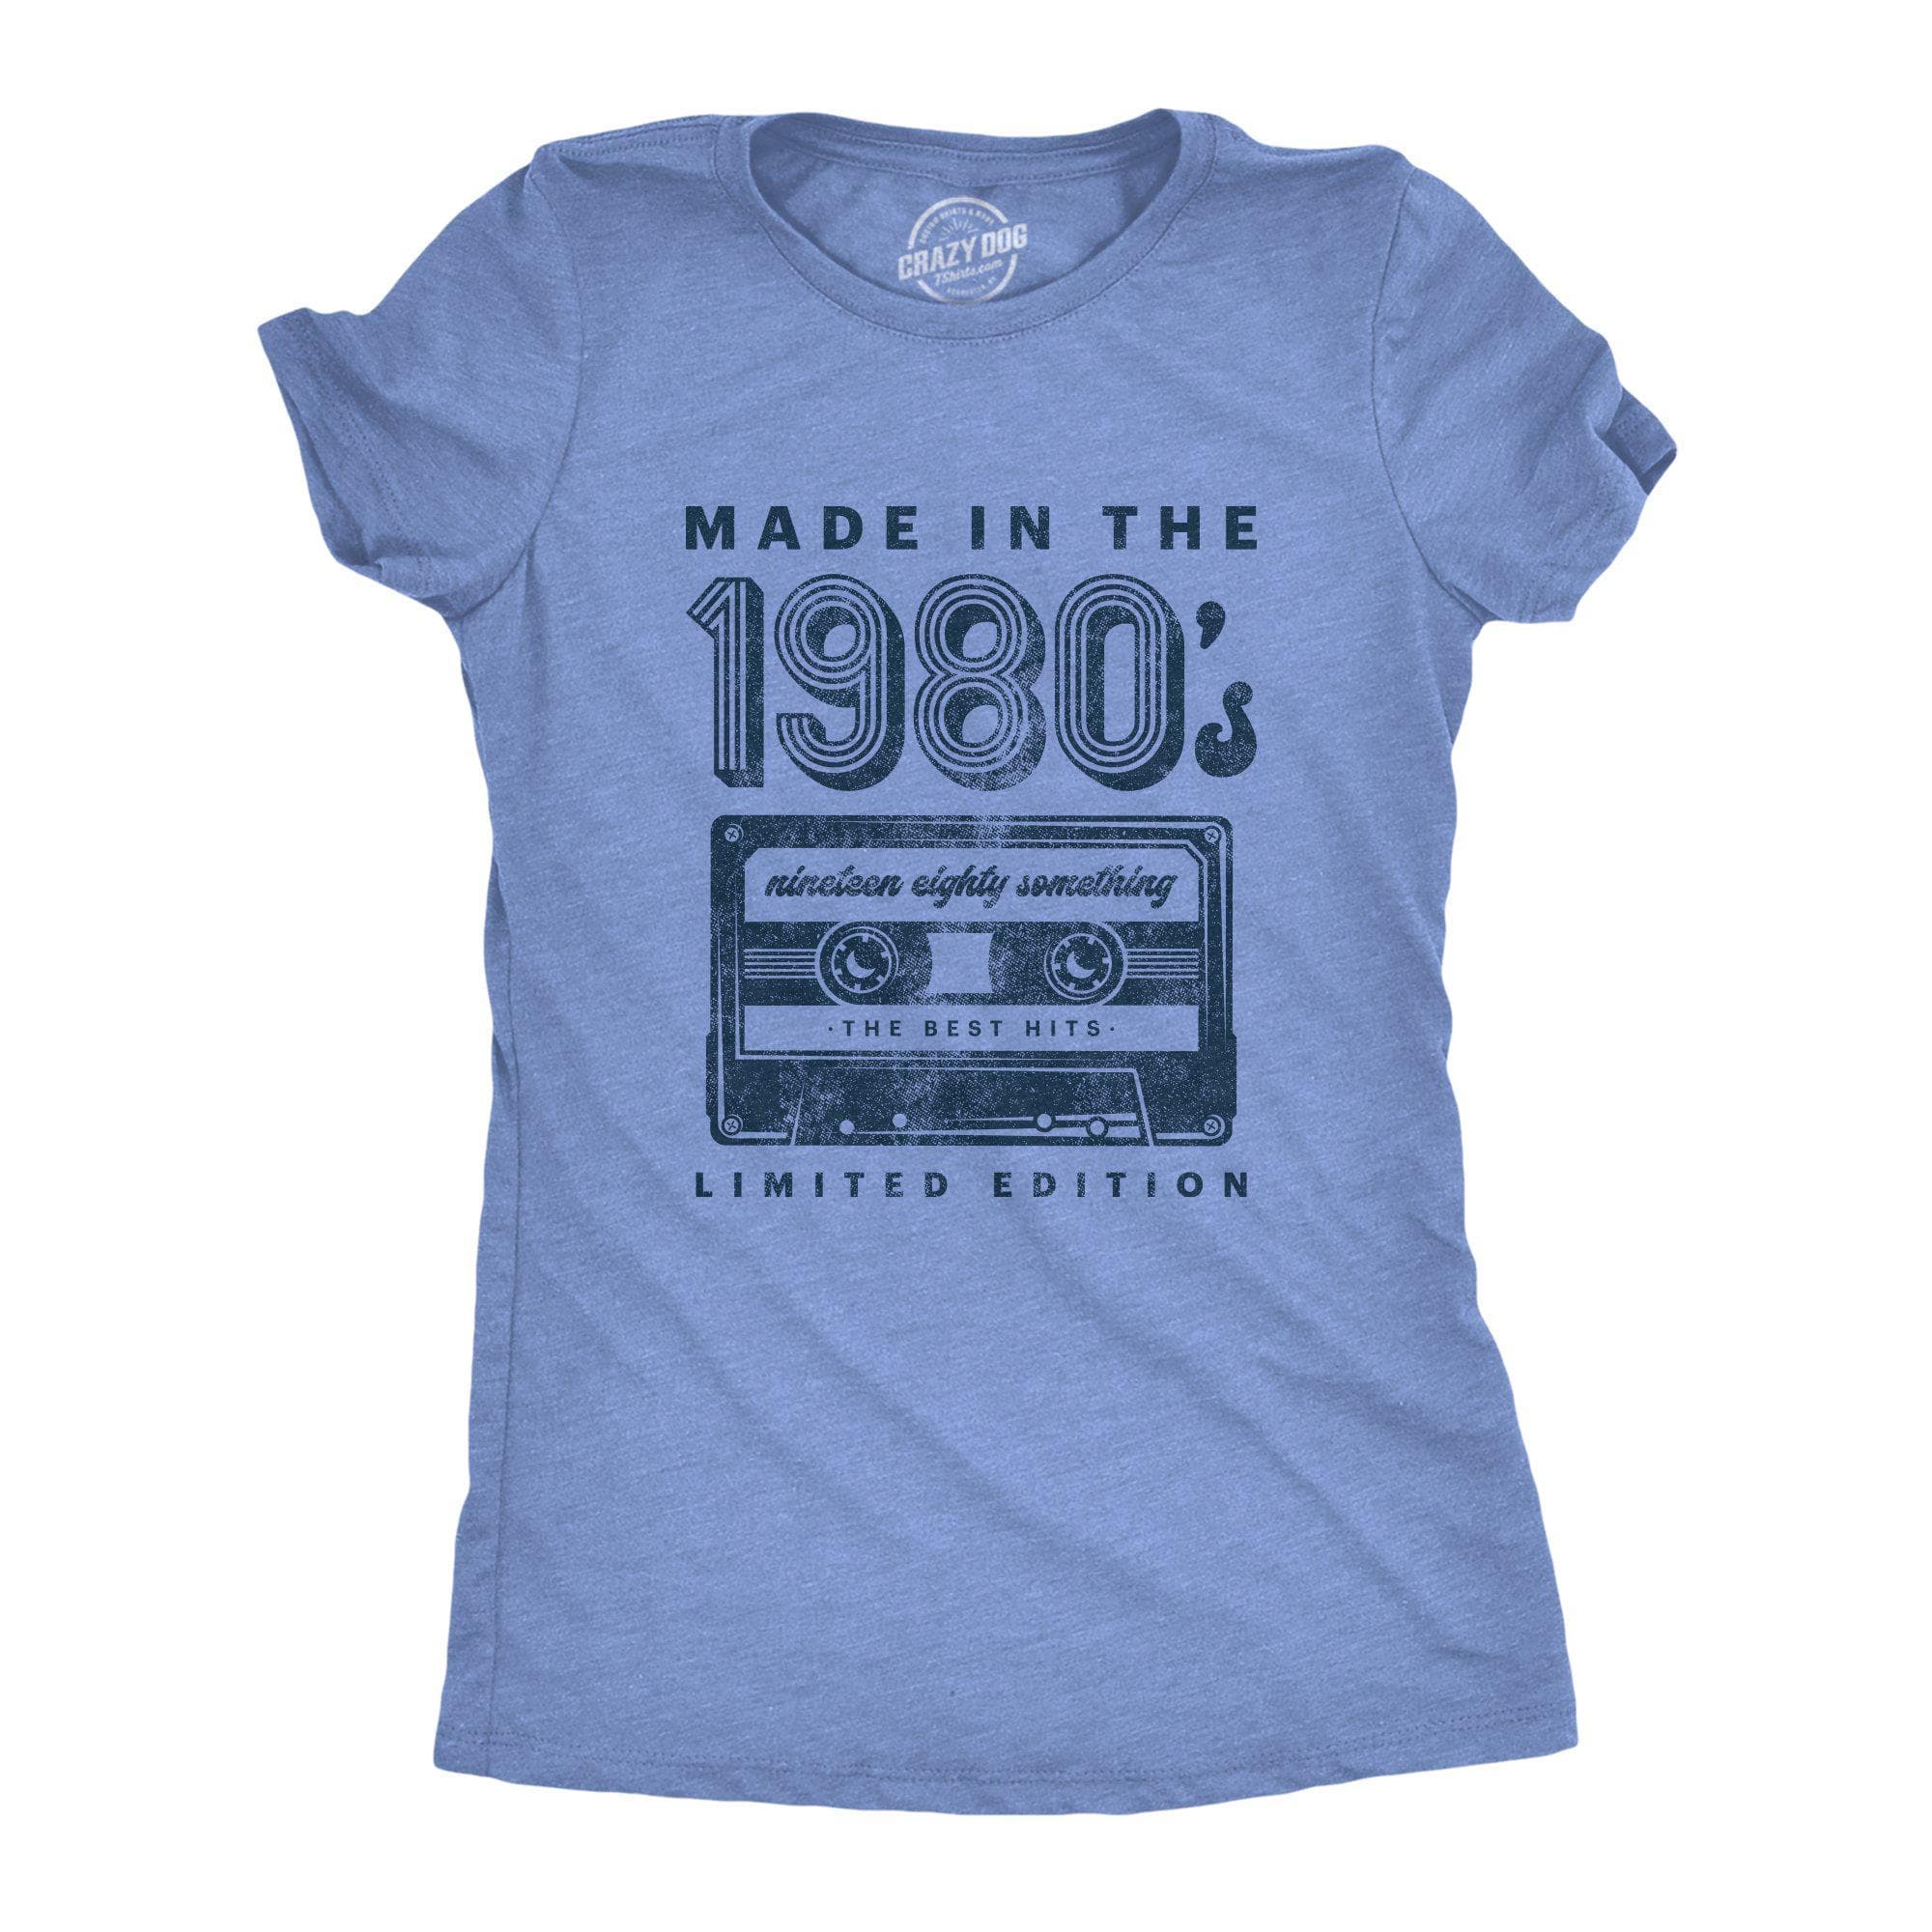 Made In The 1980s Women's Tshirt - Crazy Dog T-Shirts